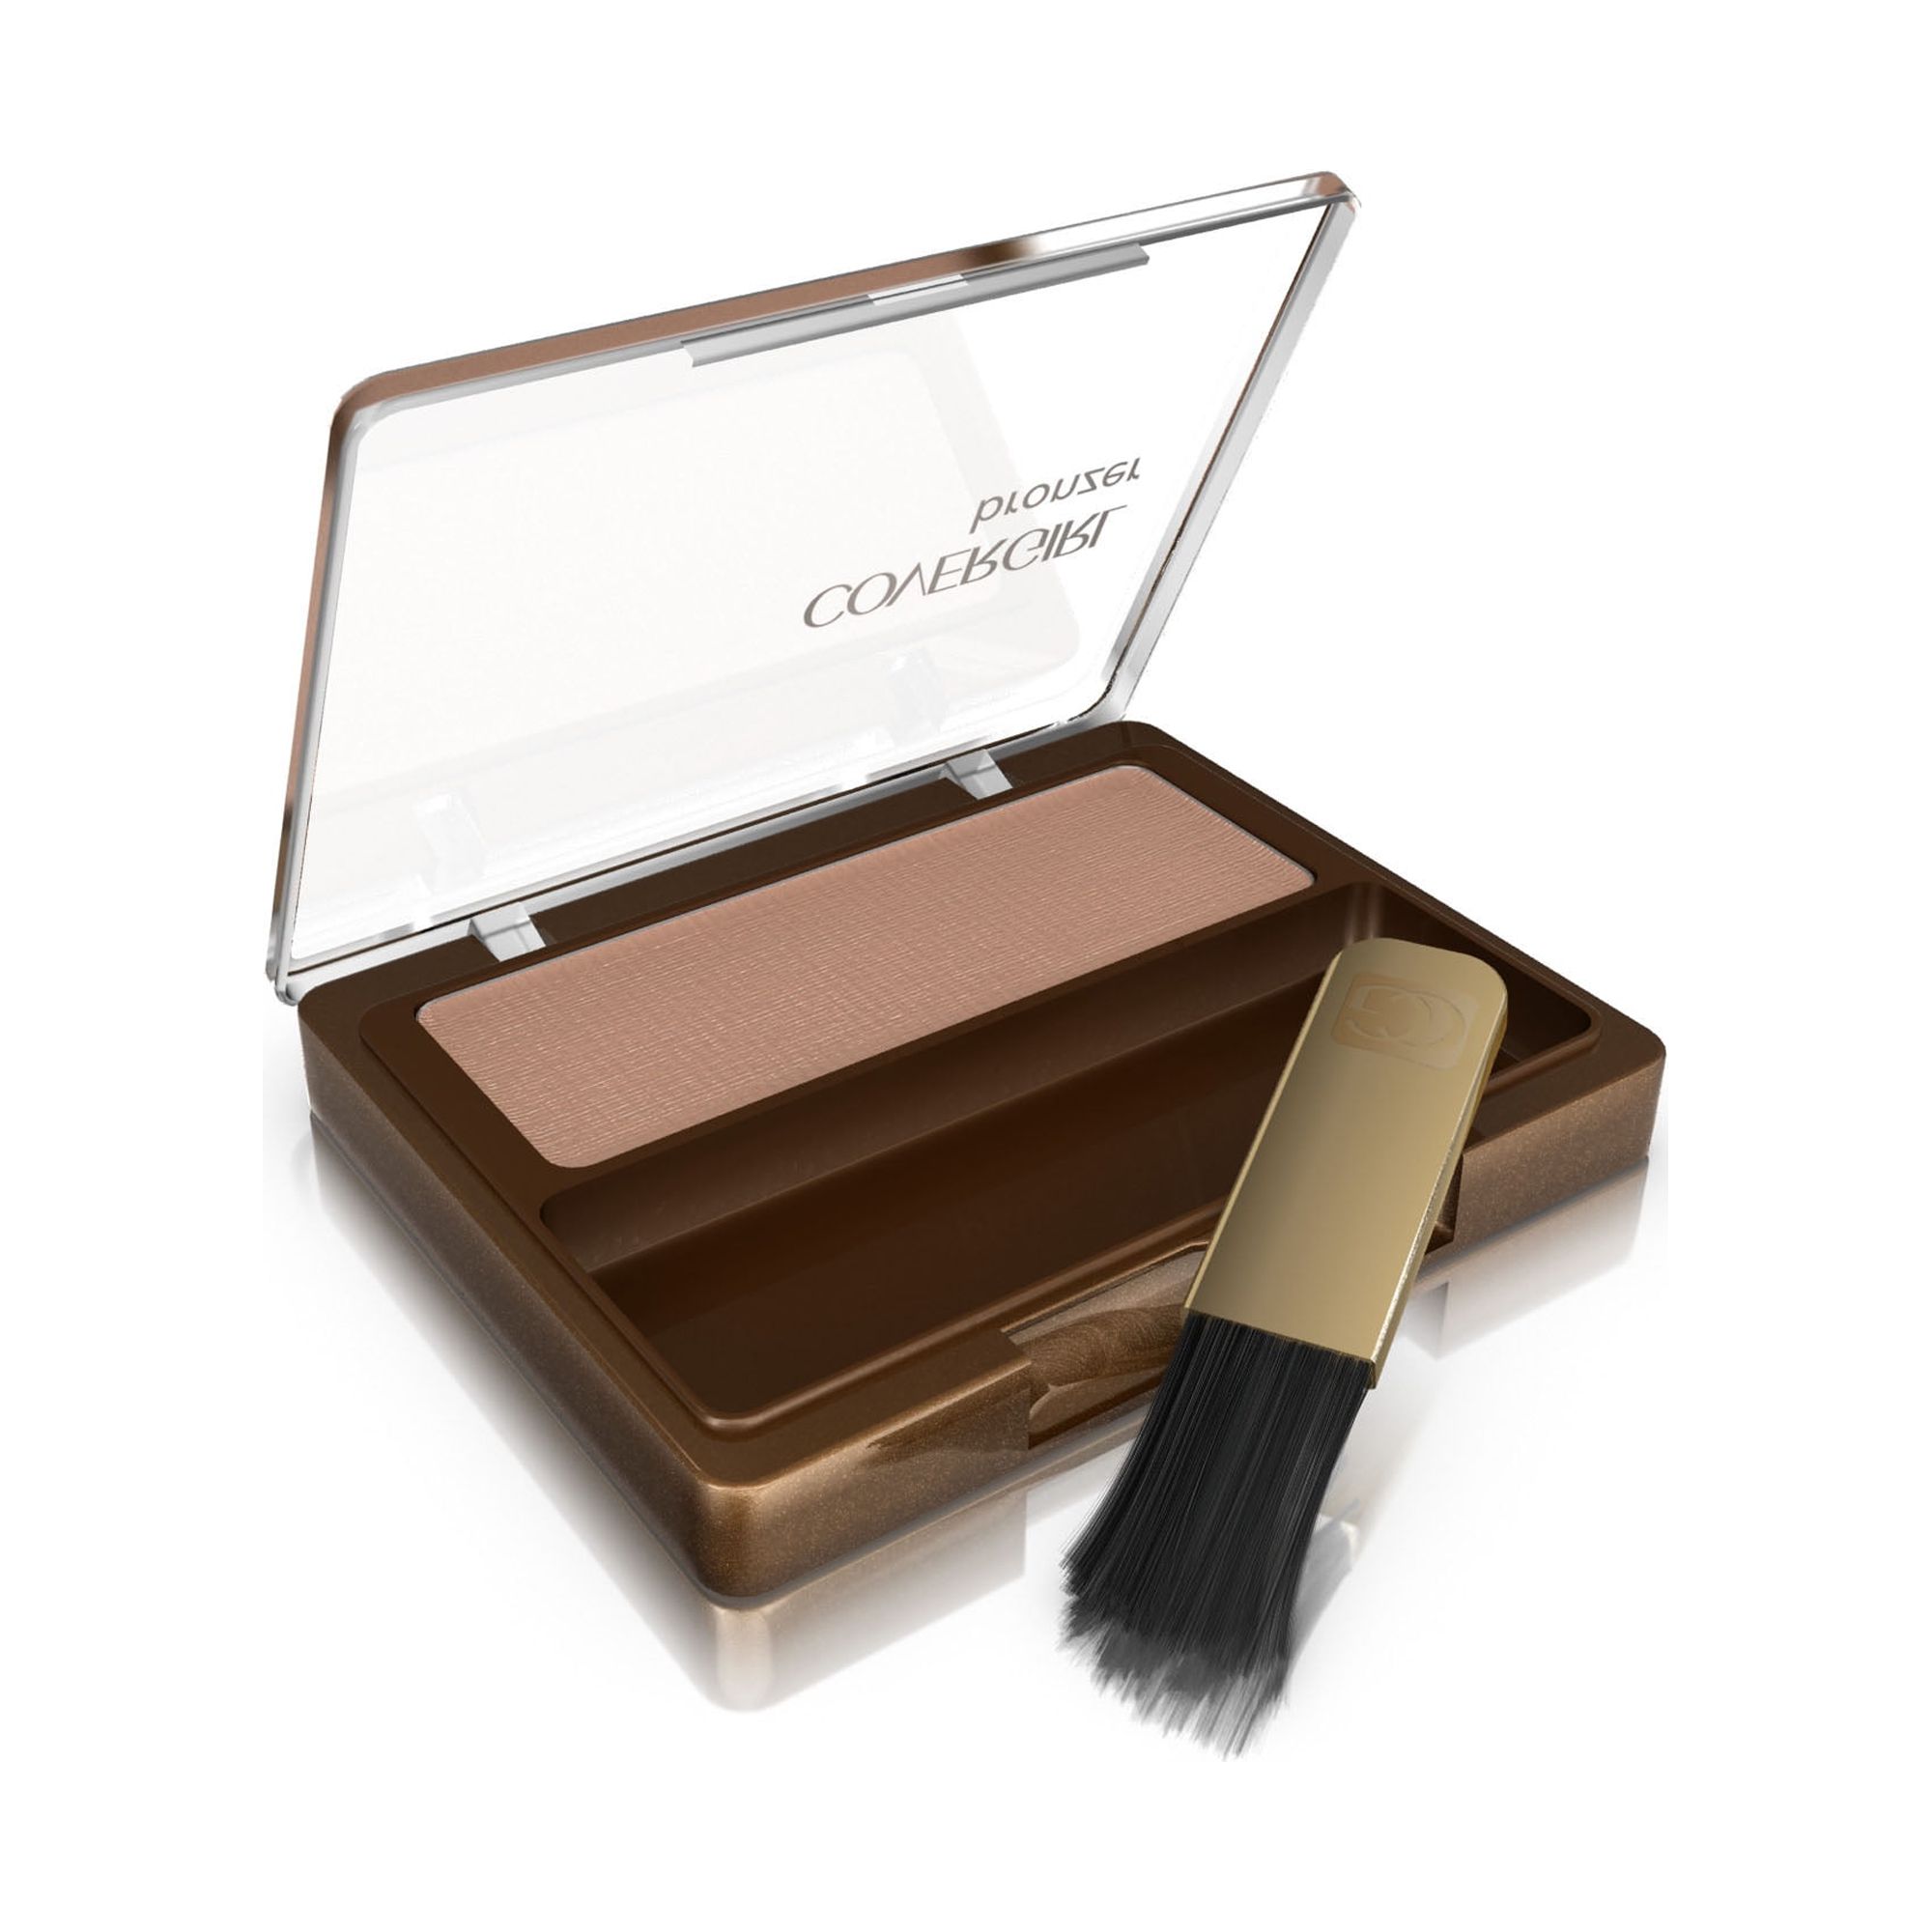 COVERGIRL Cheekers Blendable Powder Bronzer, 102 Copper Radiance - image 2 of 5